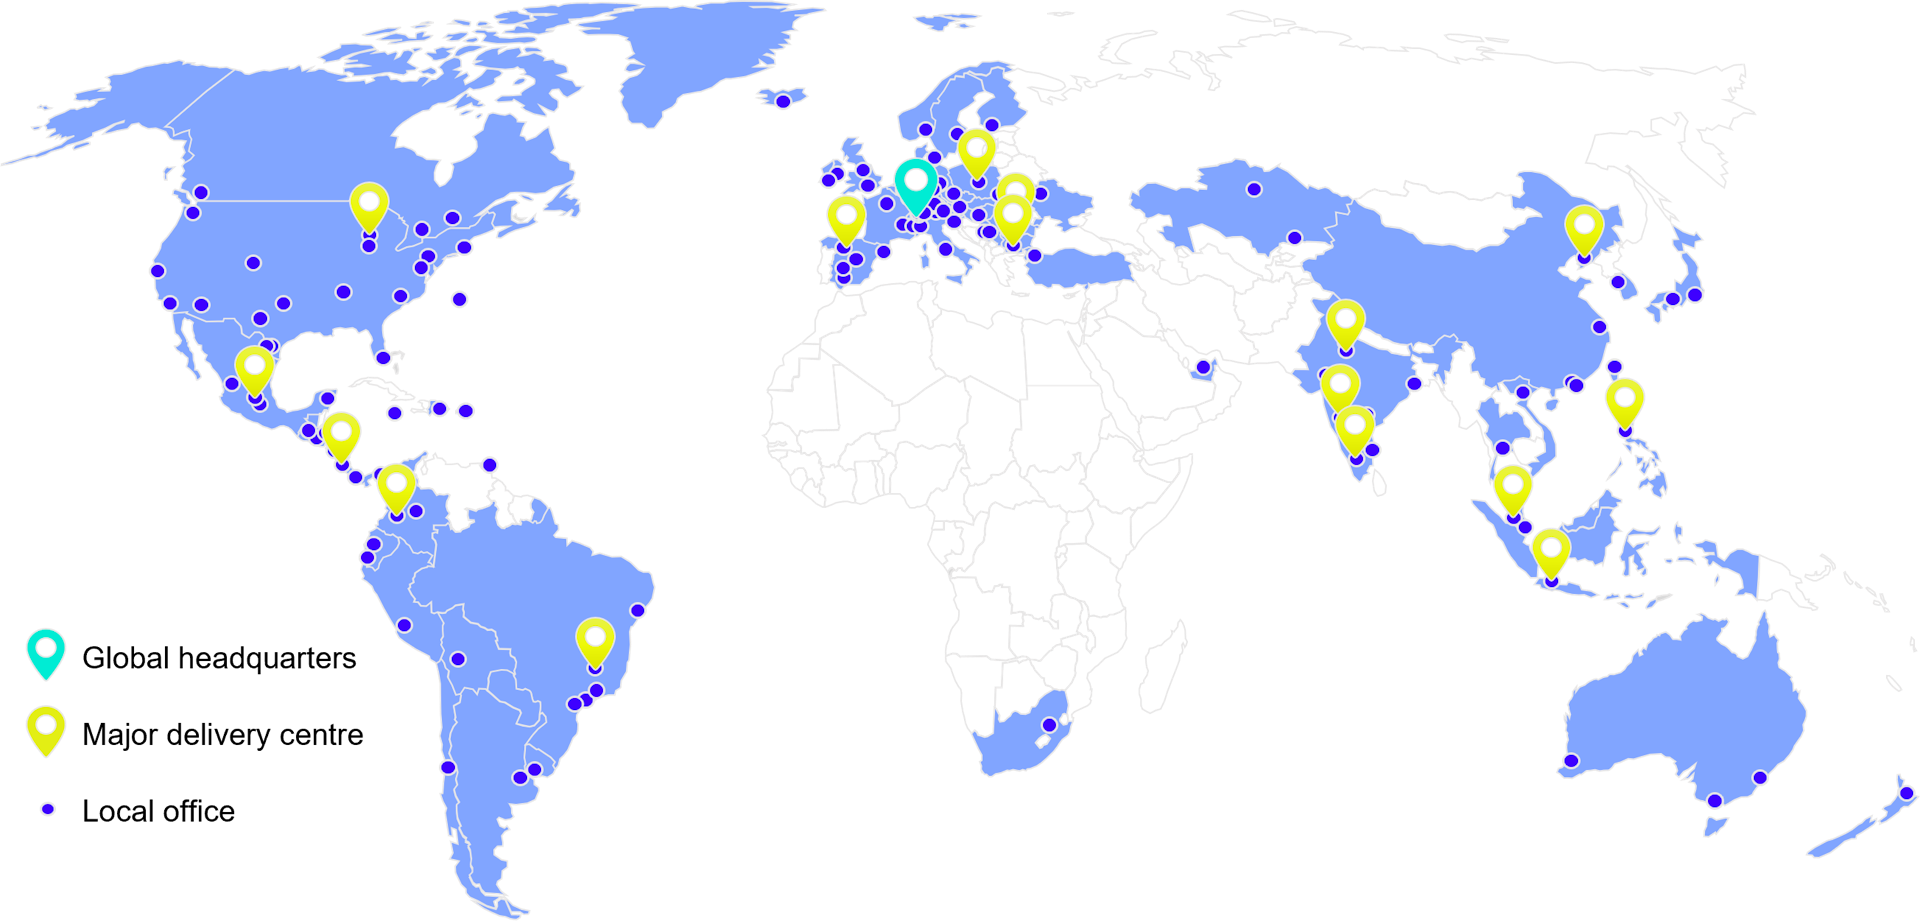 A map of the world with blue and yellow pins.